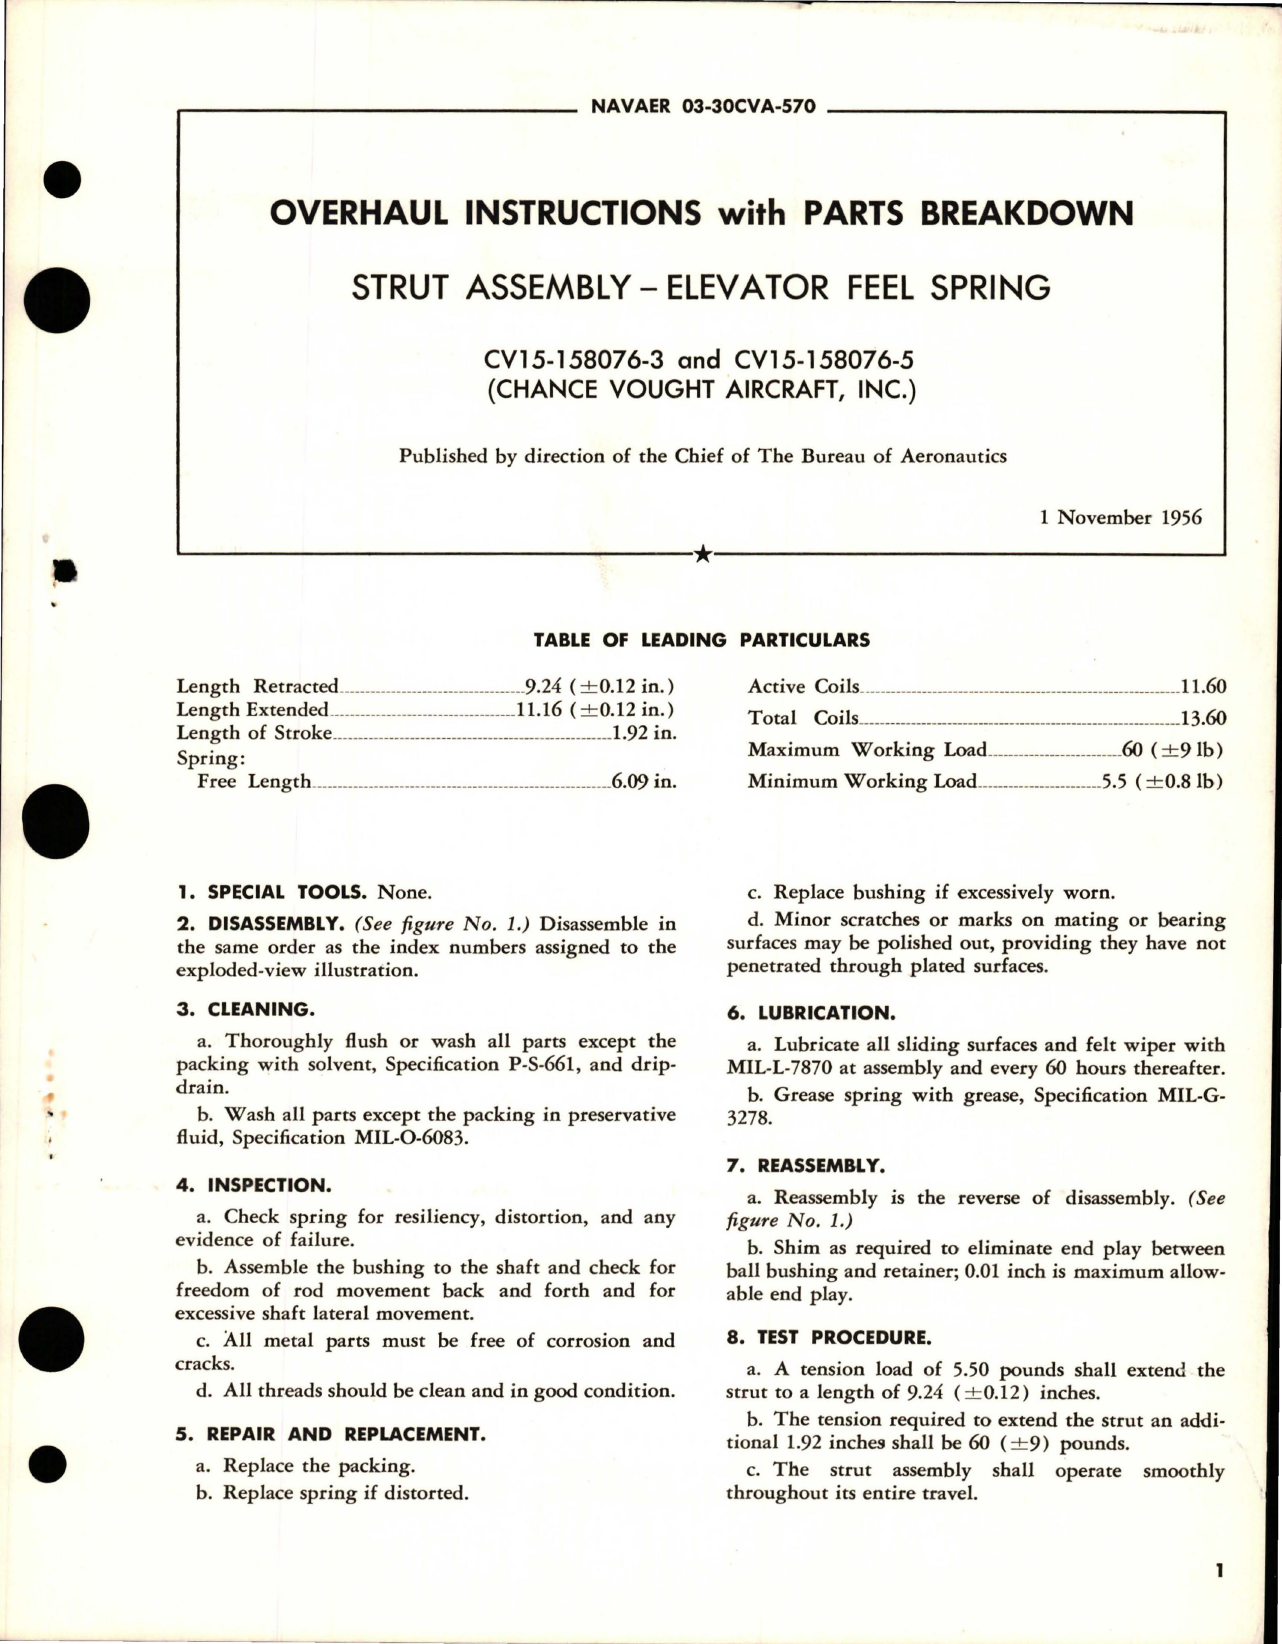 Sample page 1 from AirCorps Library document: Overhaul Instructions with Parts Breakdown for Elevator Feel Spring Strut Assembly - CV15-158076-3 and CV15-158076-5 